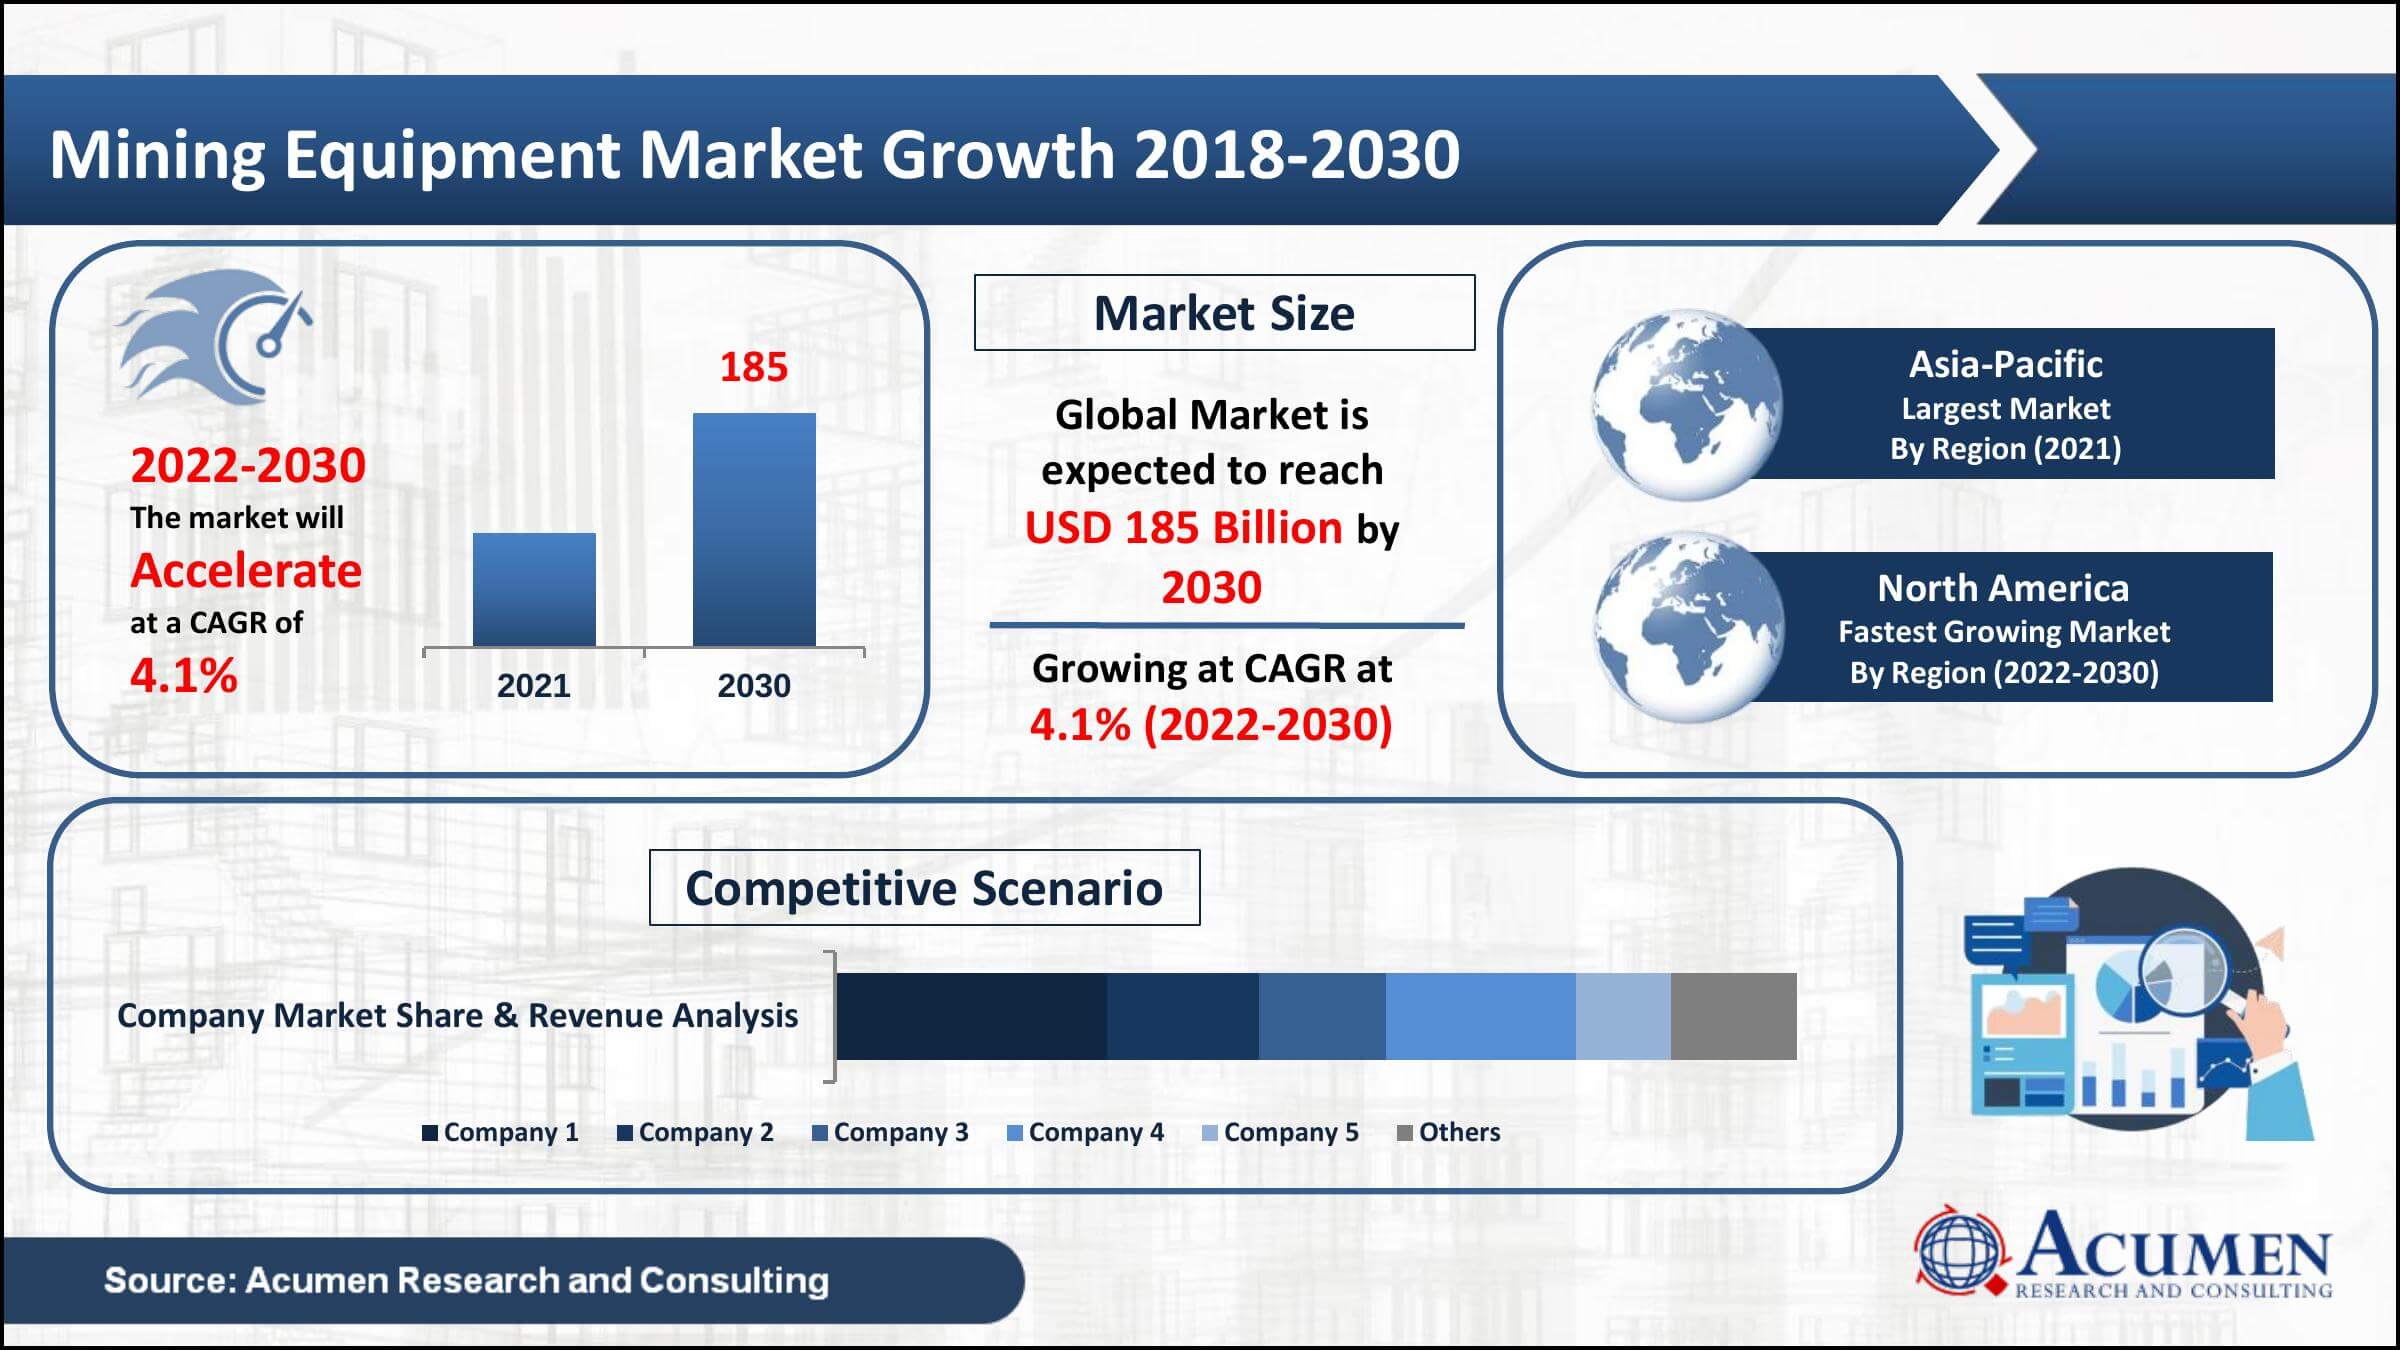 Global mining equipment market value was worth USD 133 Billion in 2021, with a 4.1% CAGR from 2022 to 2030